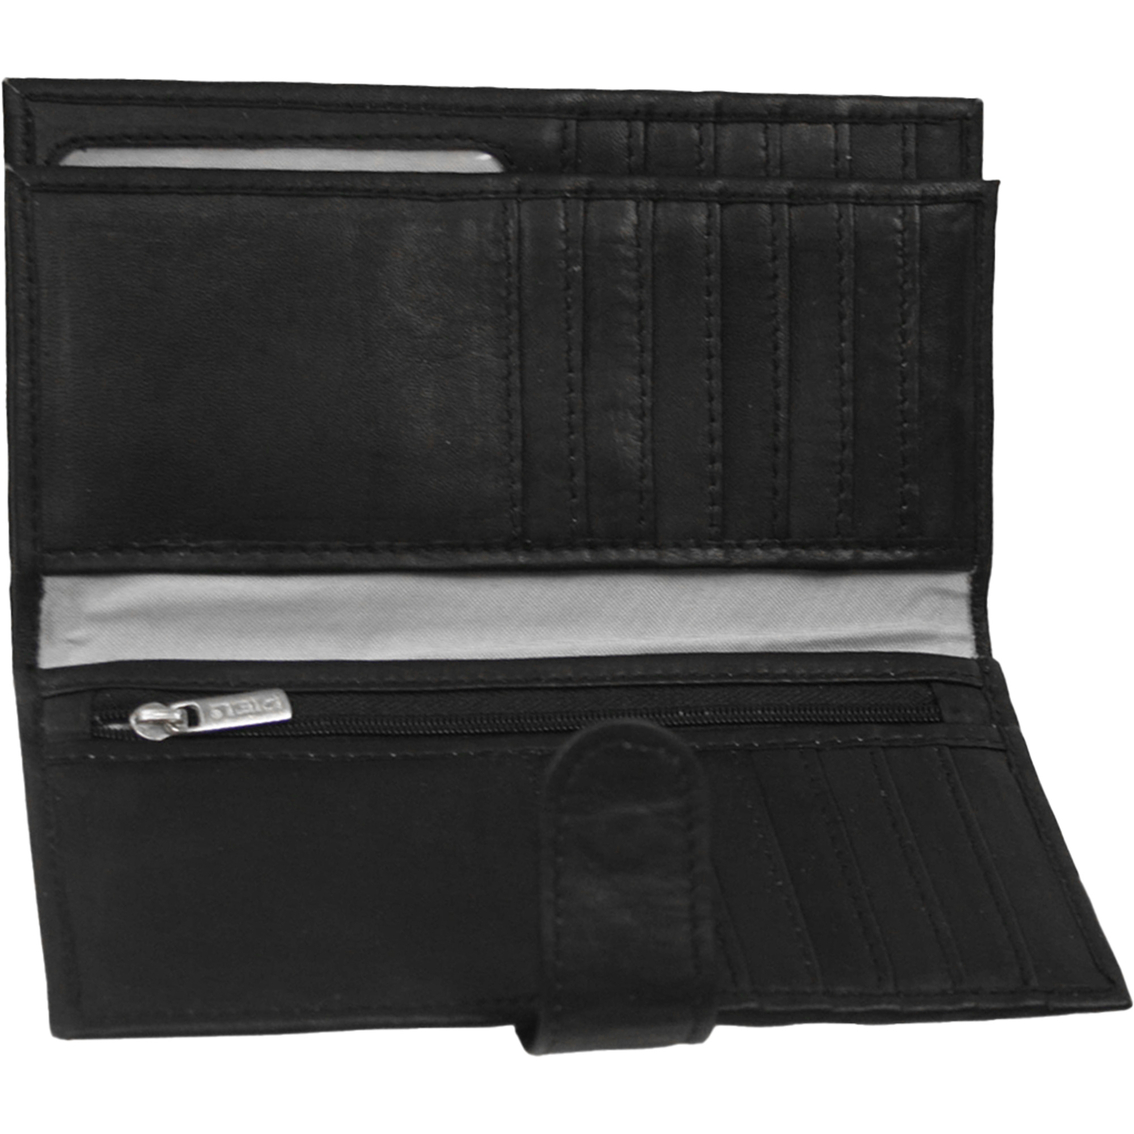 Piel Leather Multi-Card Wallet - Image 2 of 2